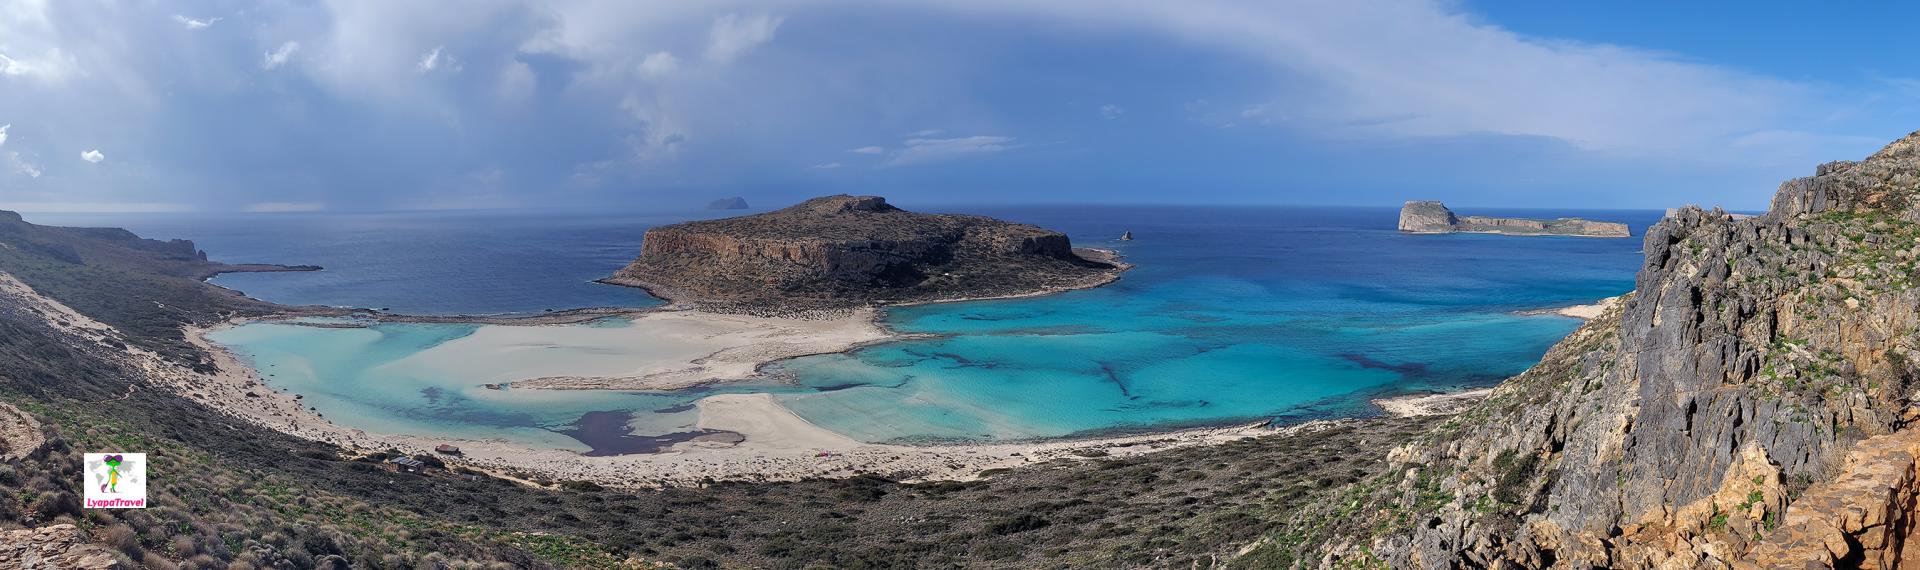 What to see in Crete